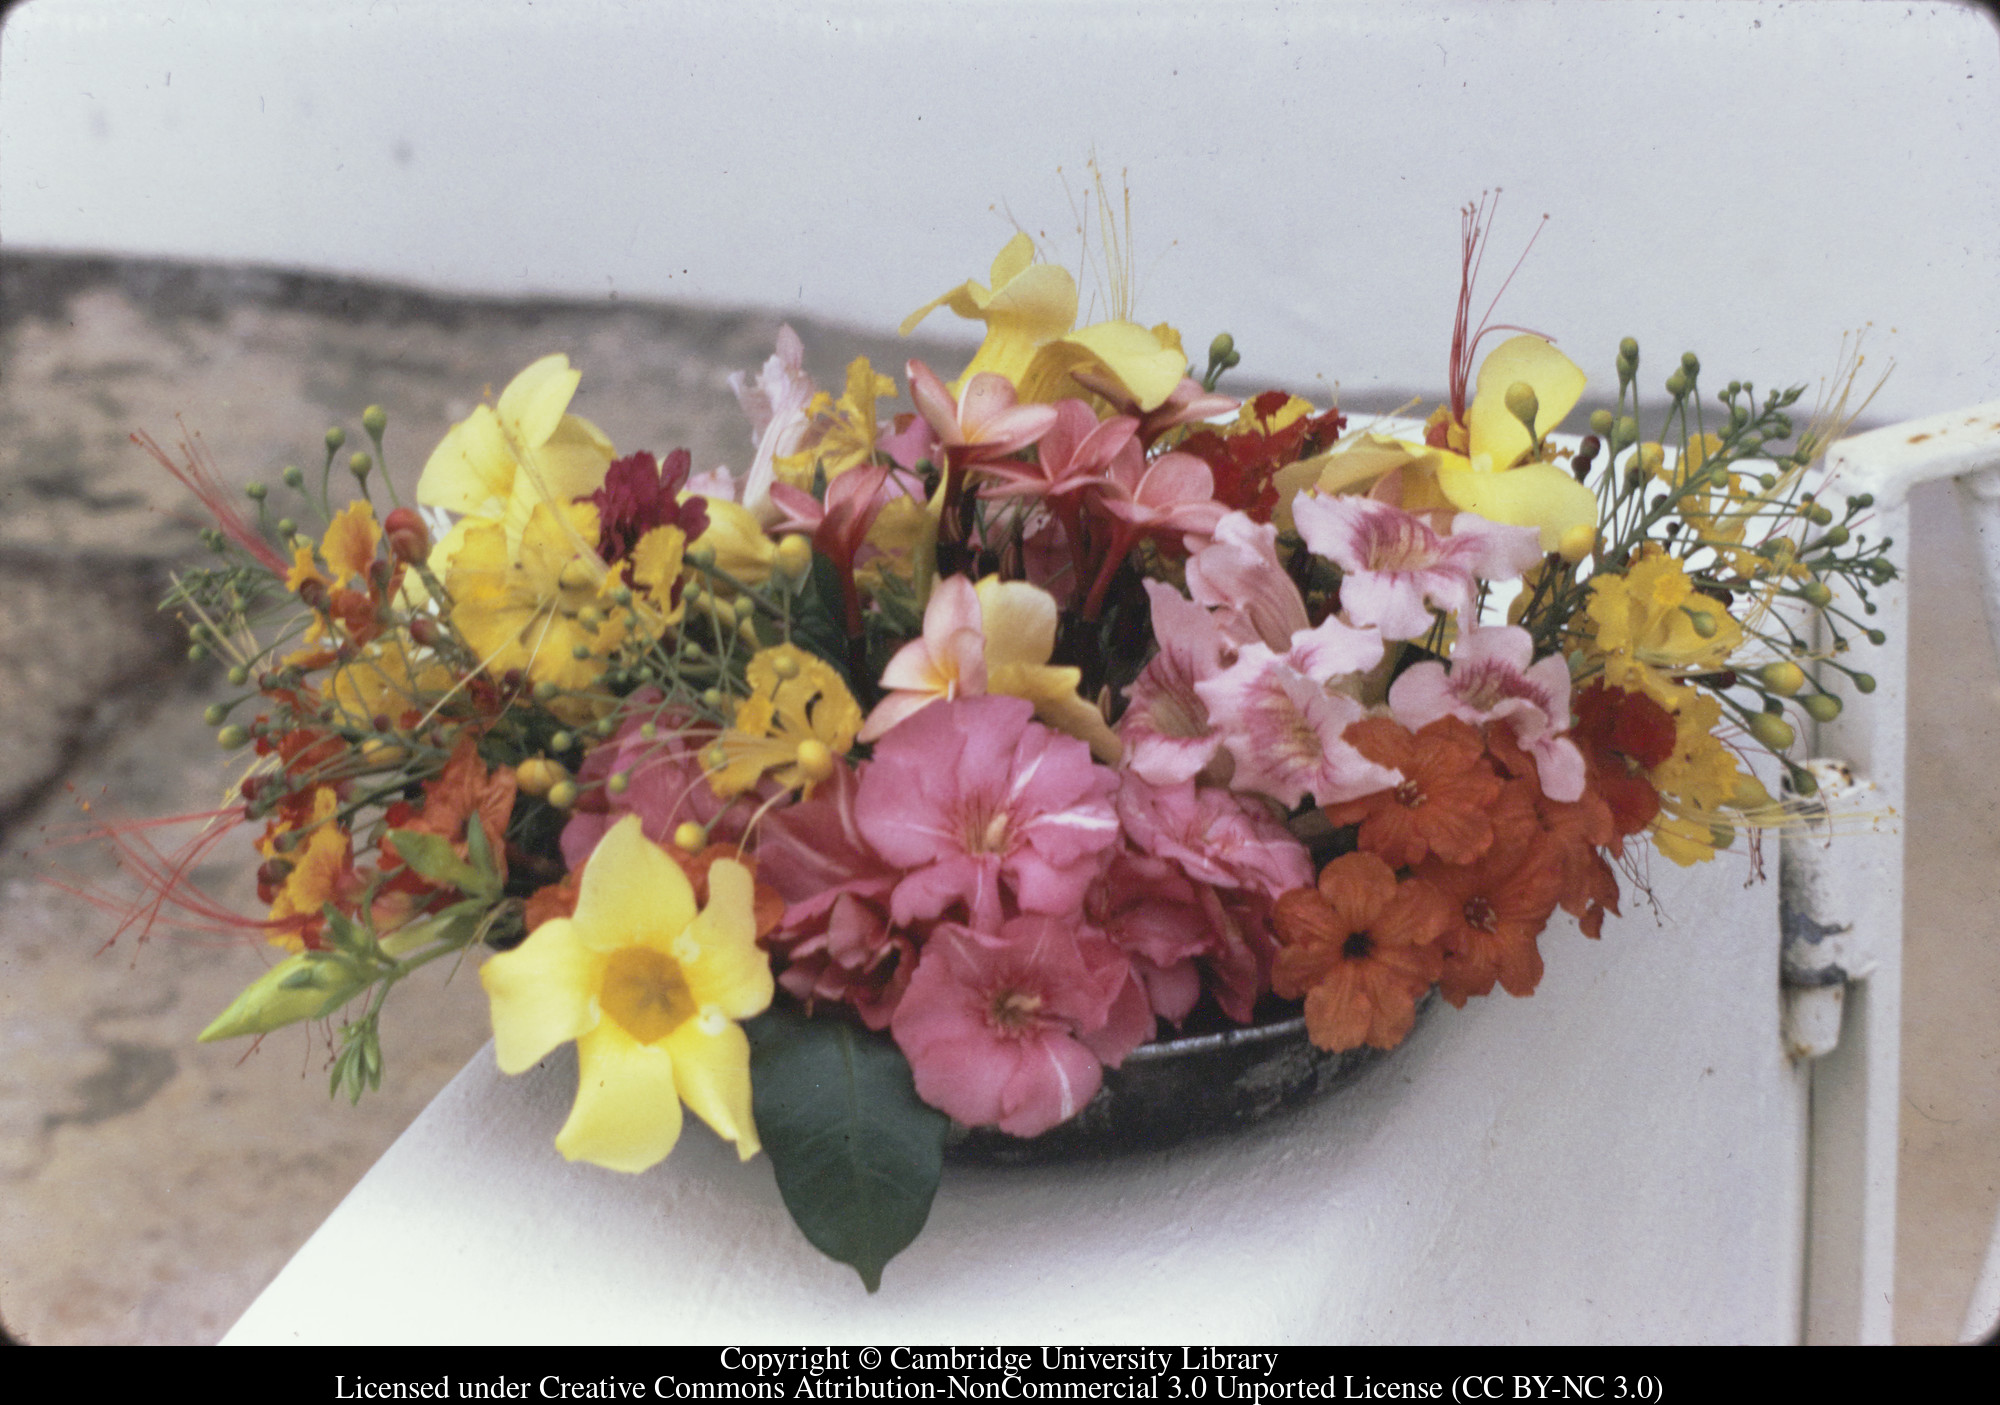 Bowl of flowers by Evelyn Williams C [Ciceron], 1971-02